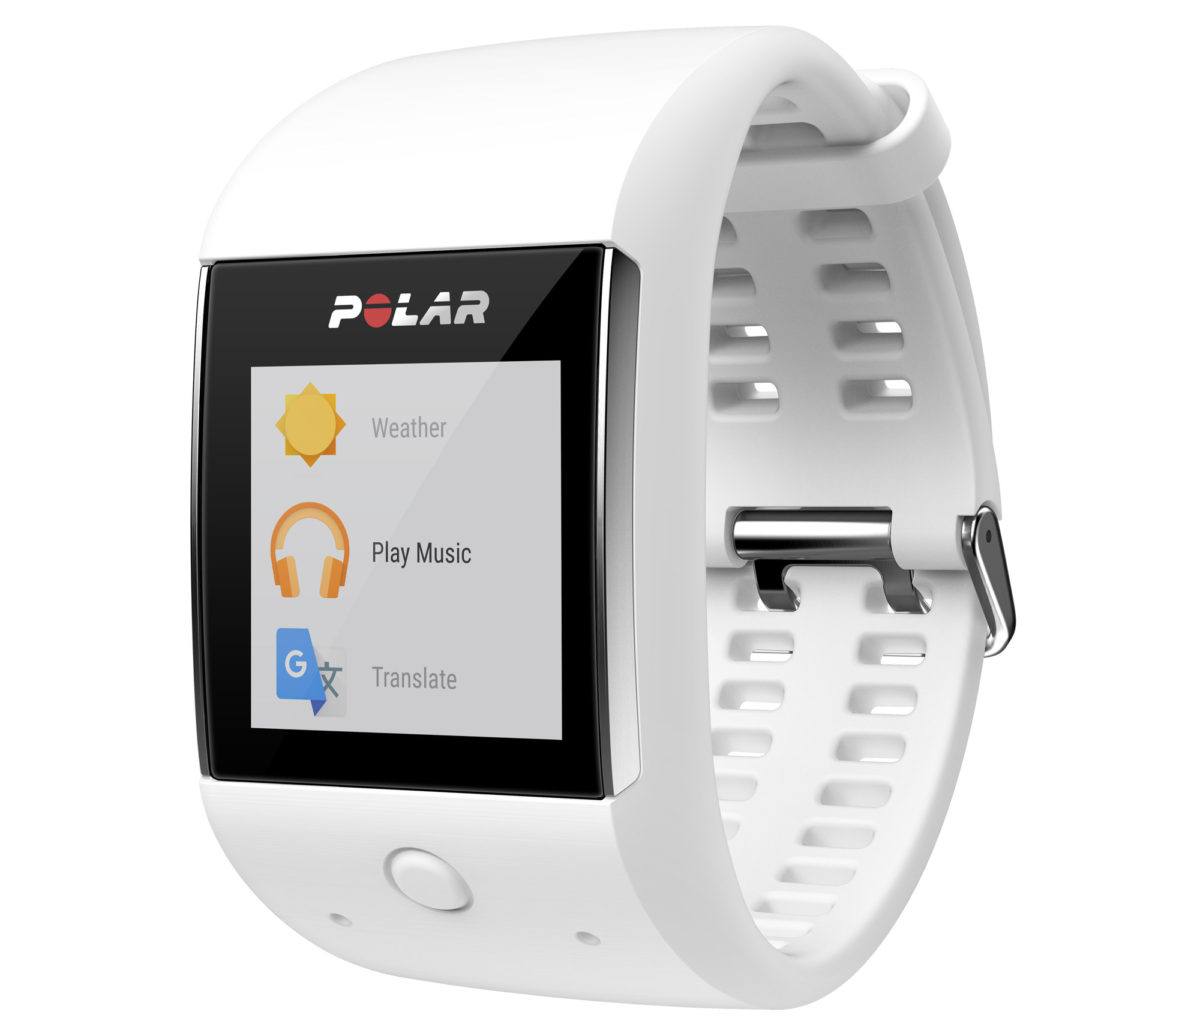 Polar updates M600 with Android Wear 2.0, plus swimming metrics